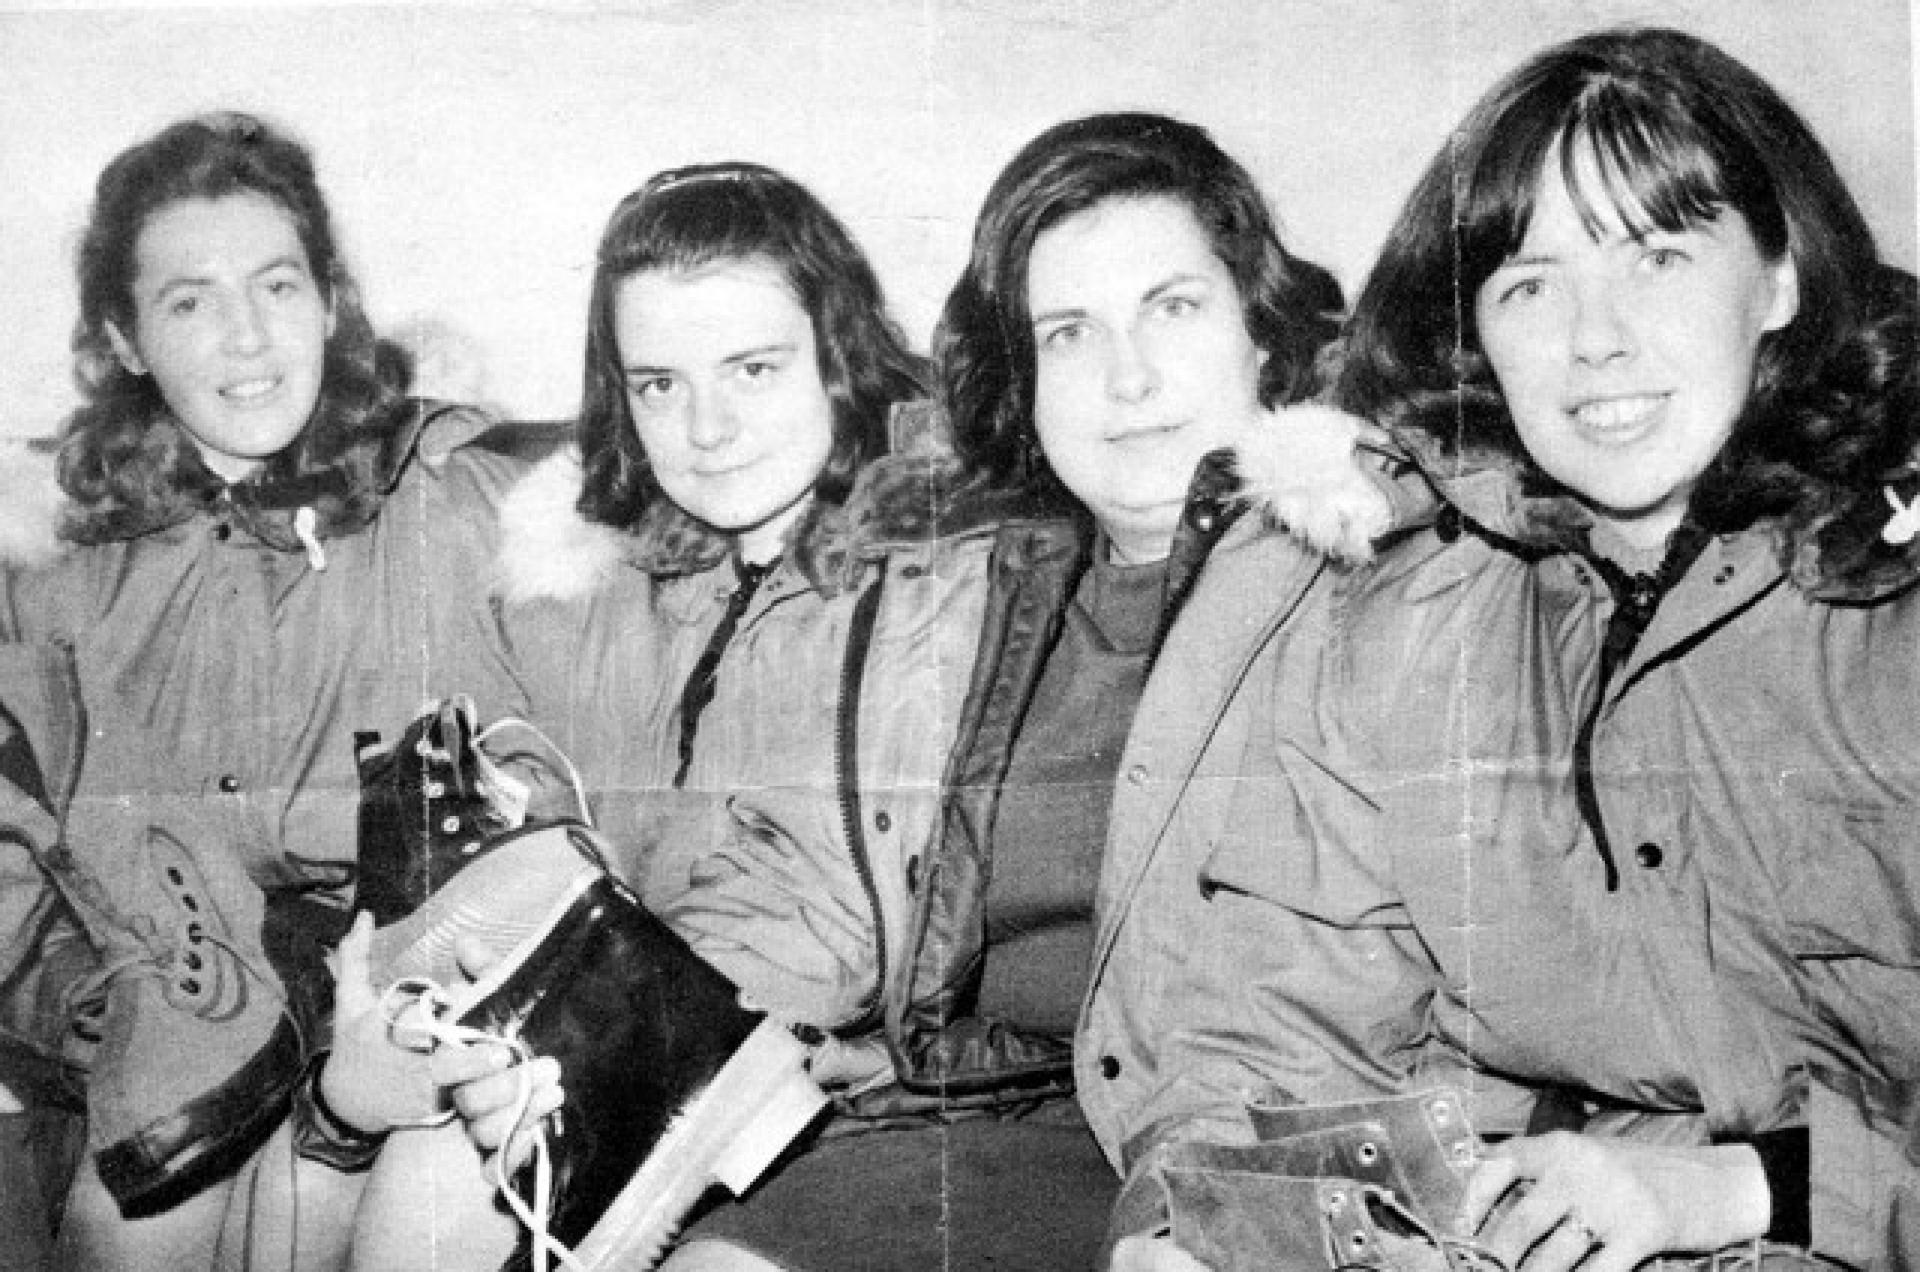 Four women pose for a photo in winter gear.